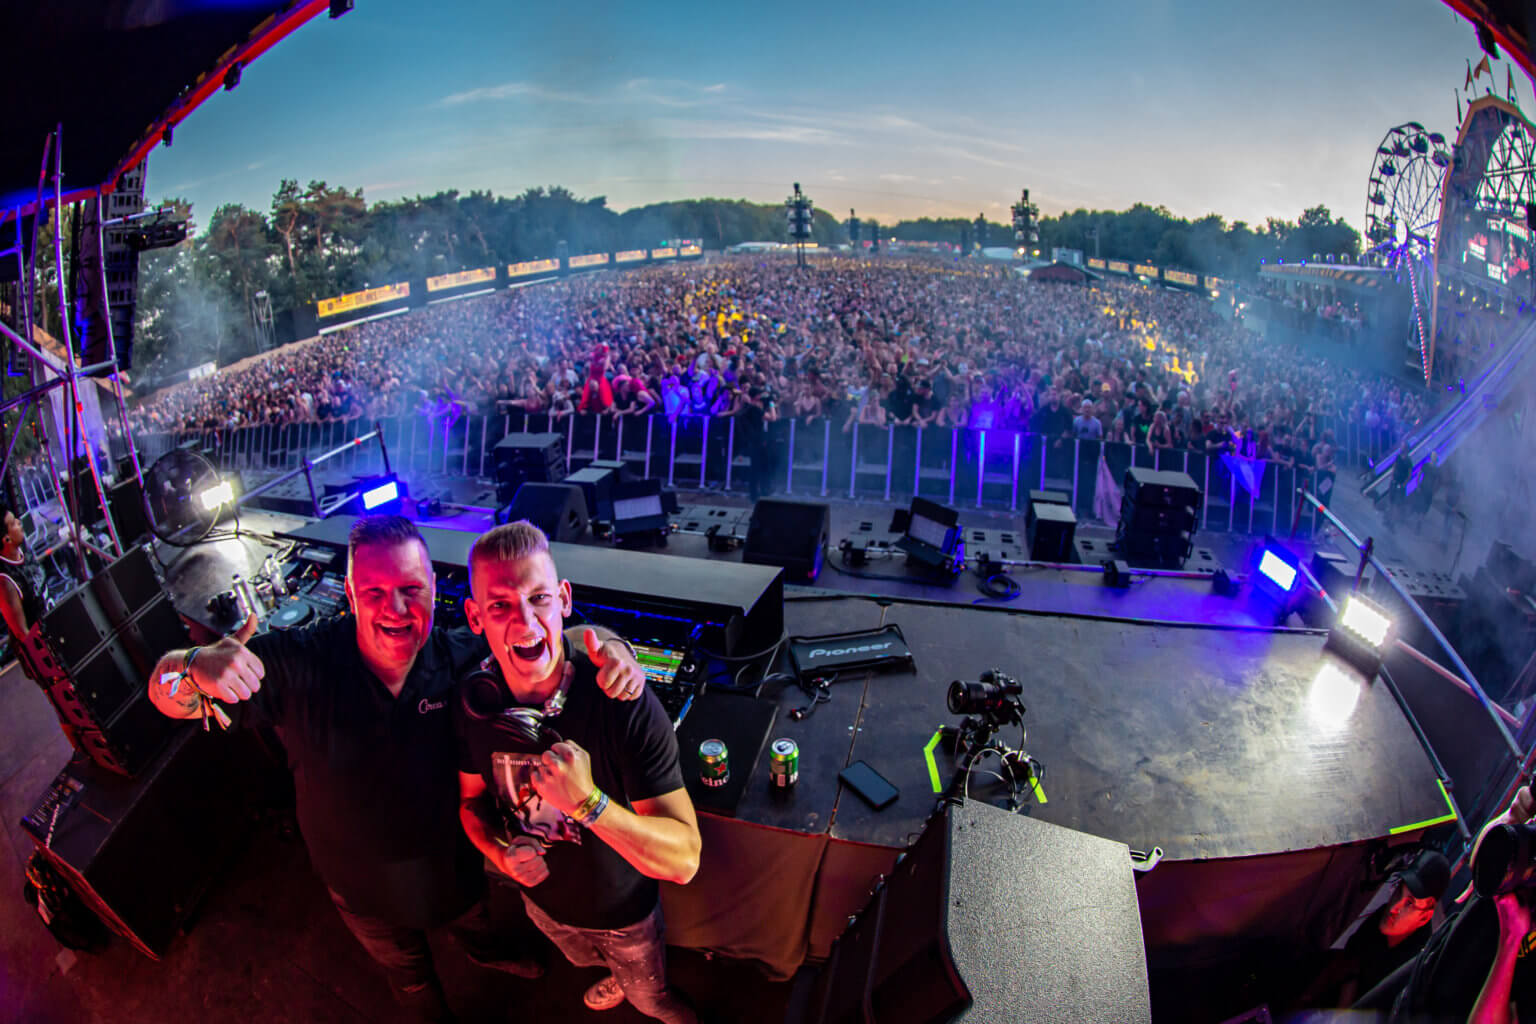 Check the set of Partyraiser vs Spitnoise at Dominator 2022 now!